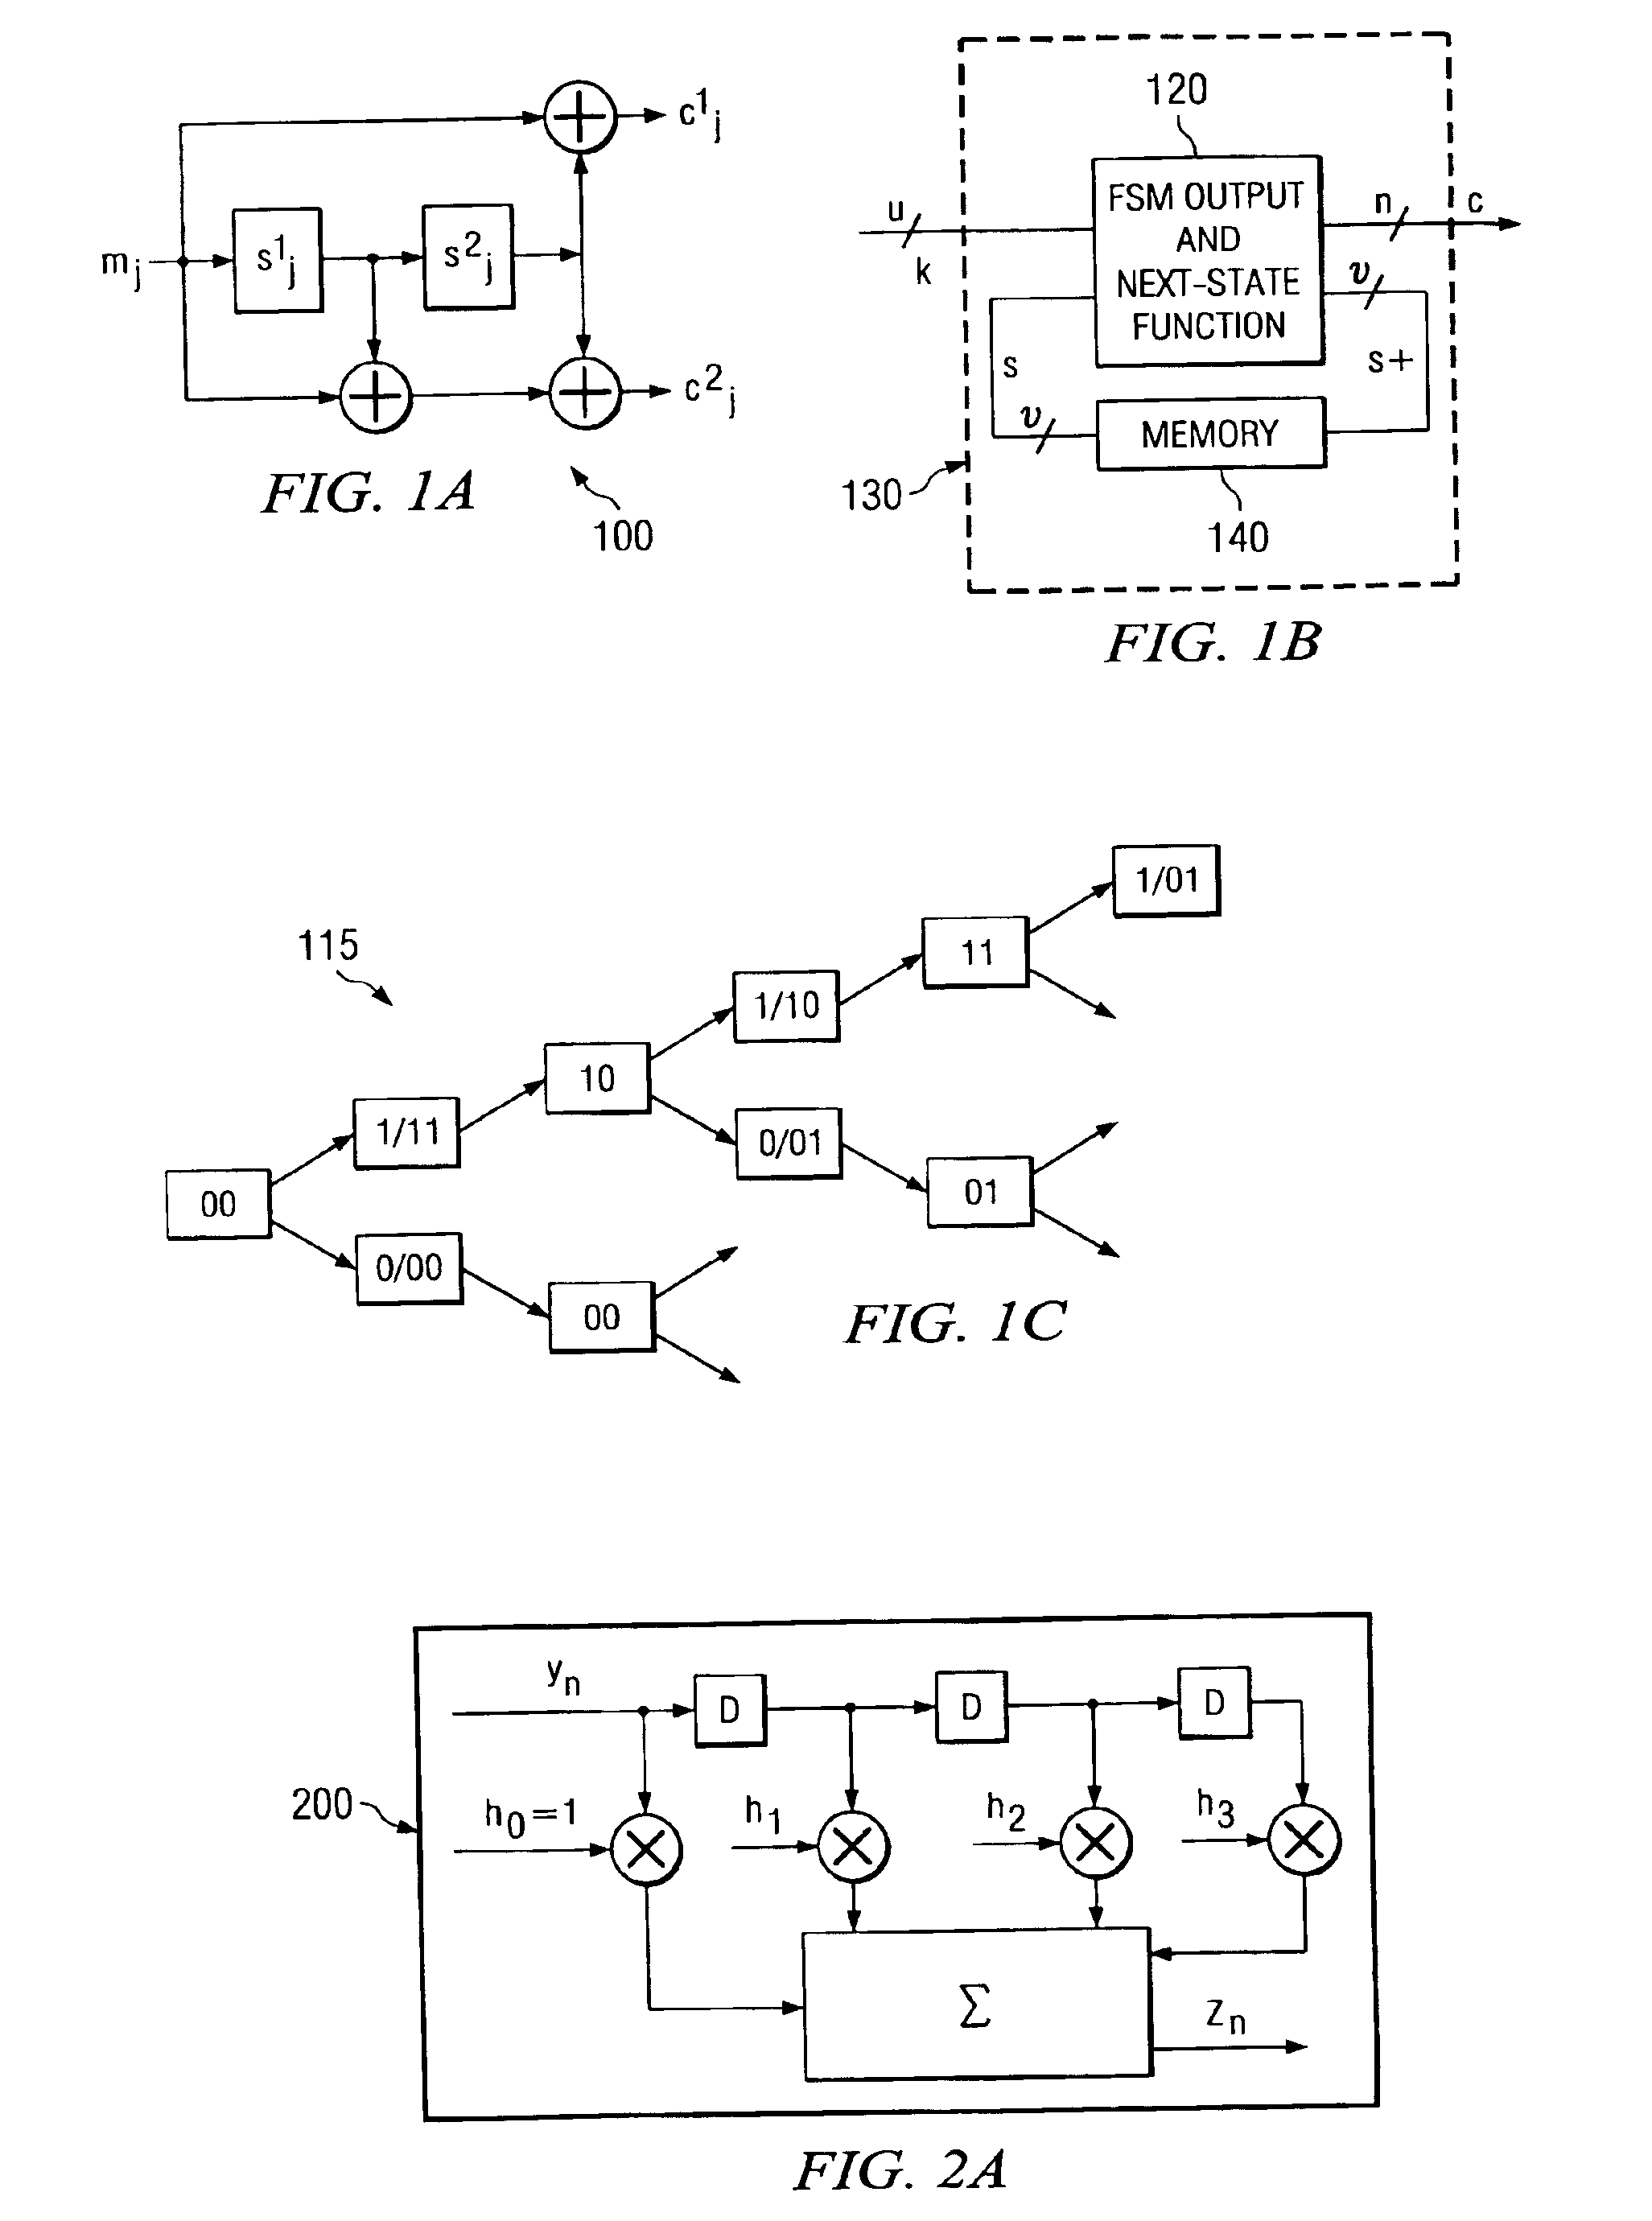 Joint equalization and decoding using a search-based decoding algorithm